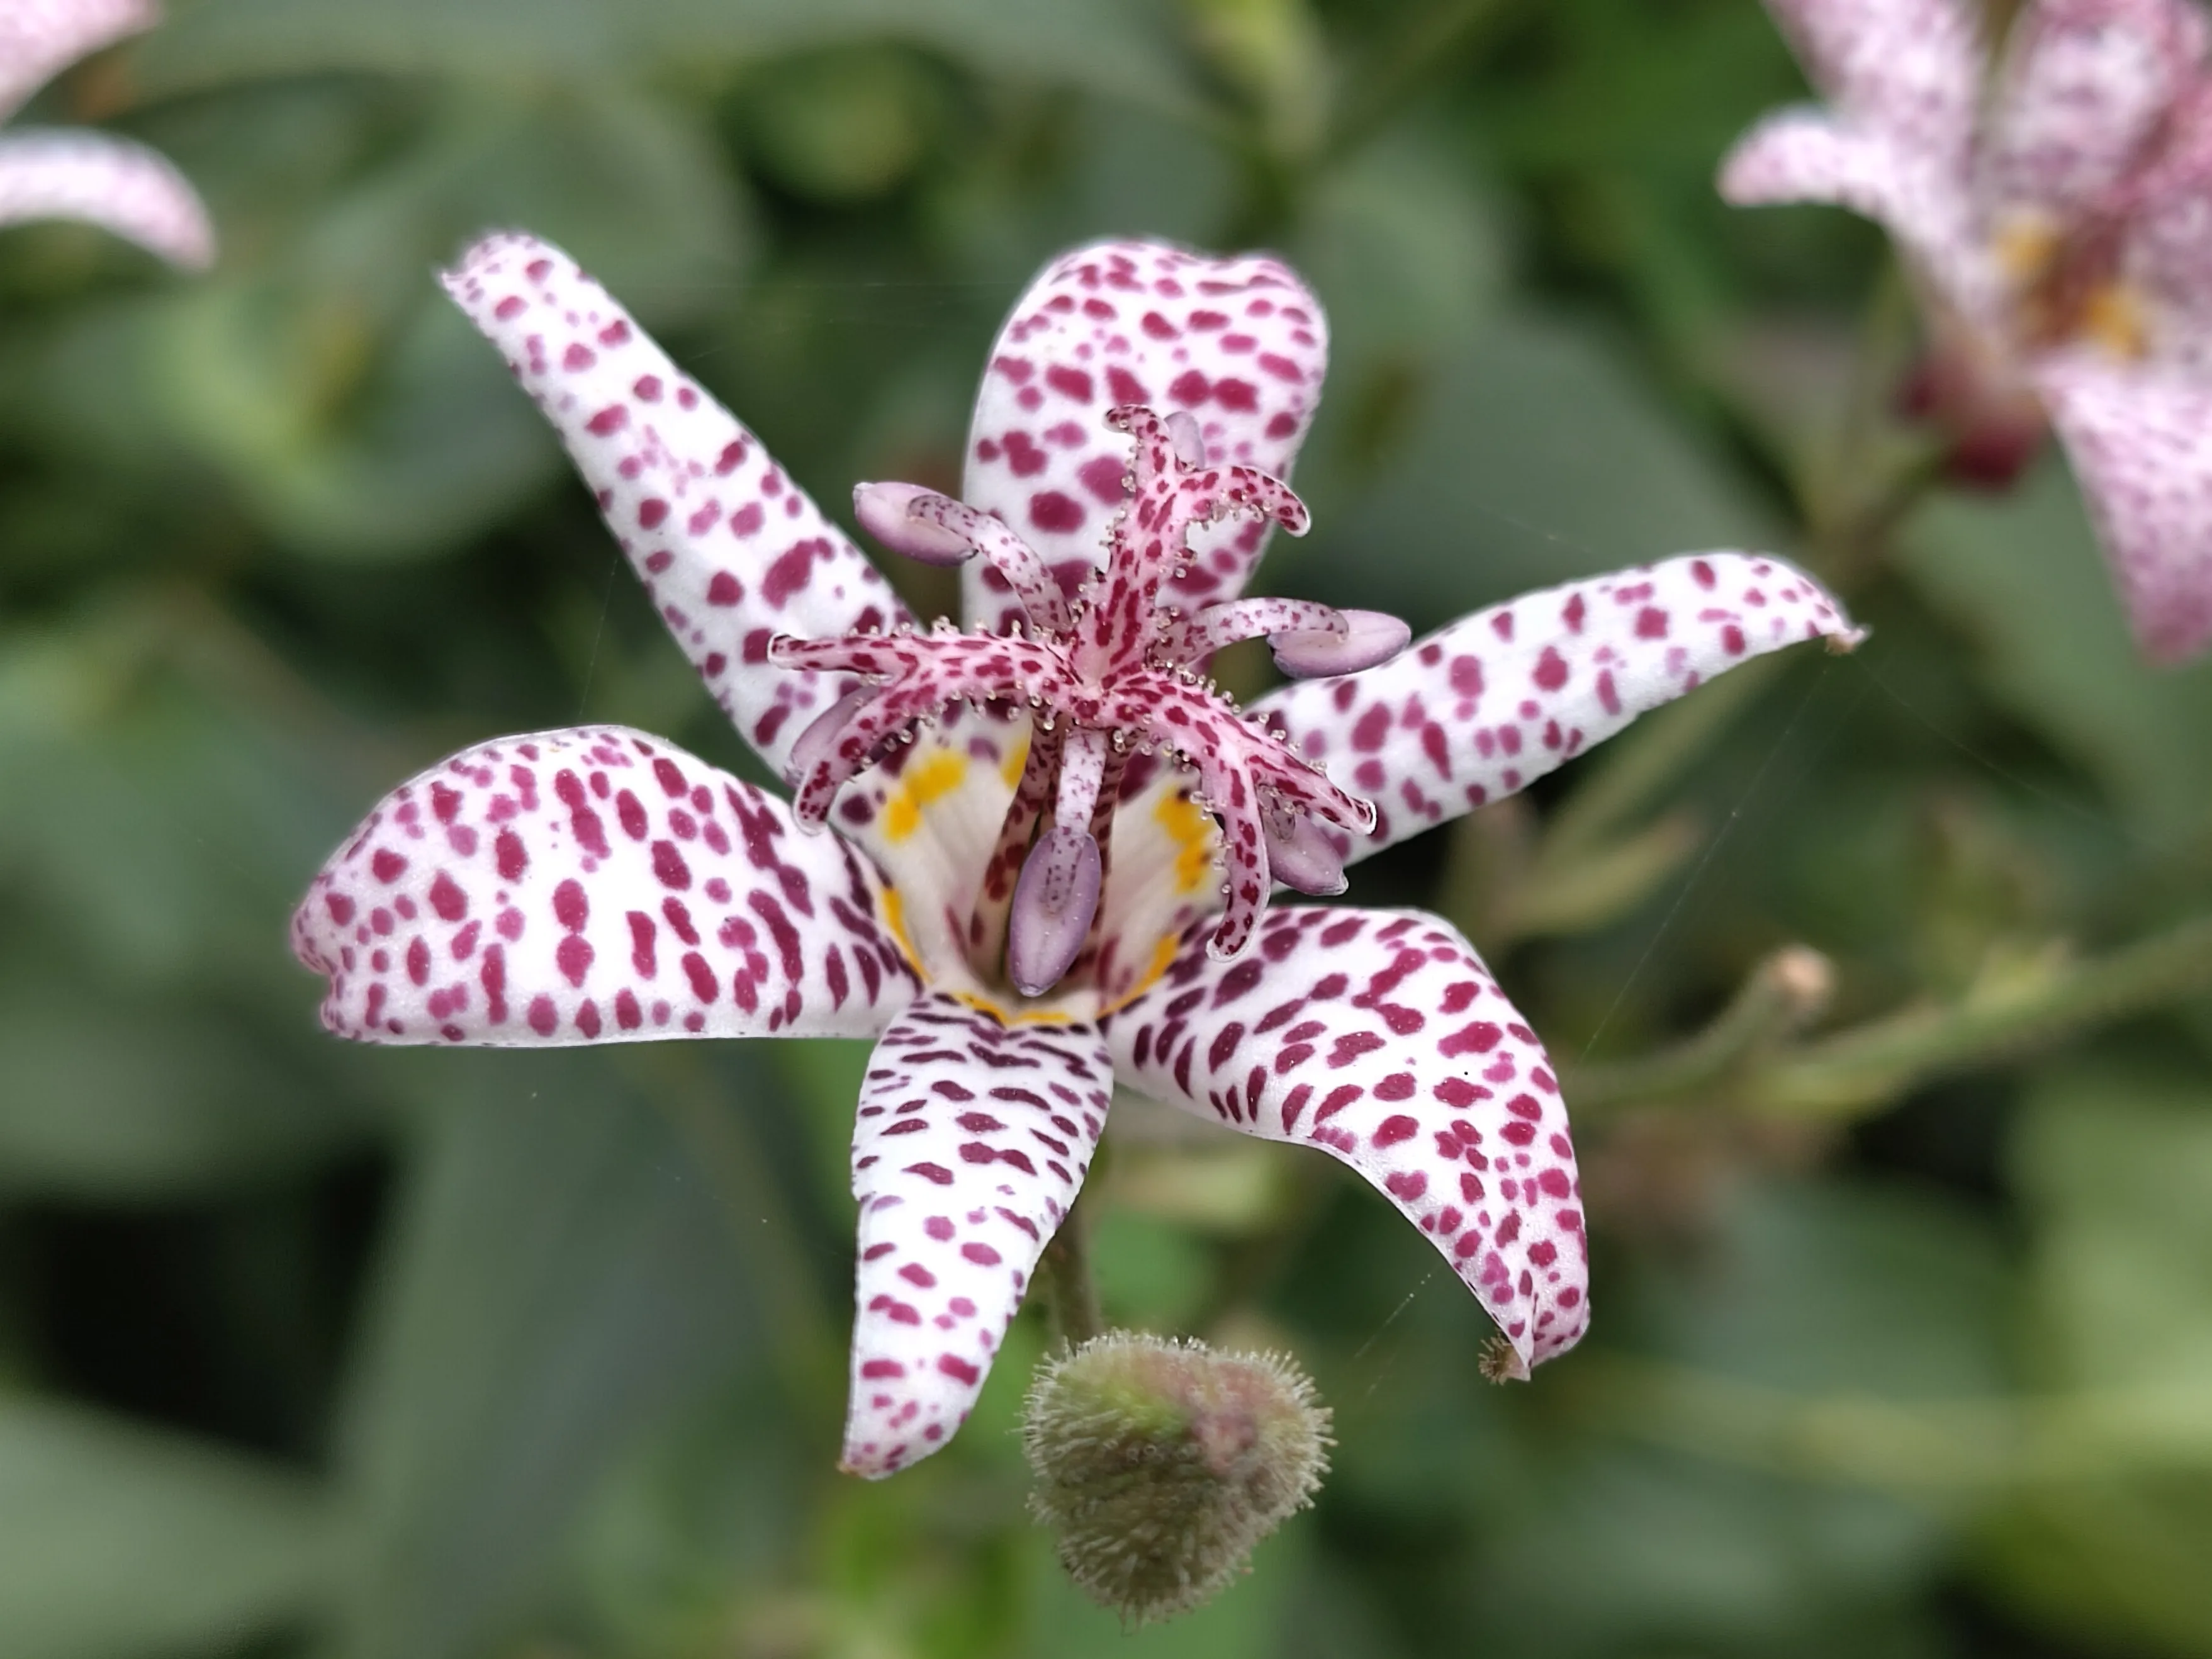 Close up of a toad lily bloom. It's white whith dark pink dots.